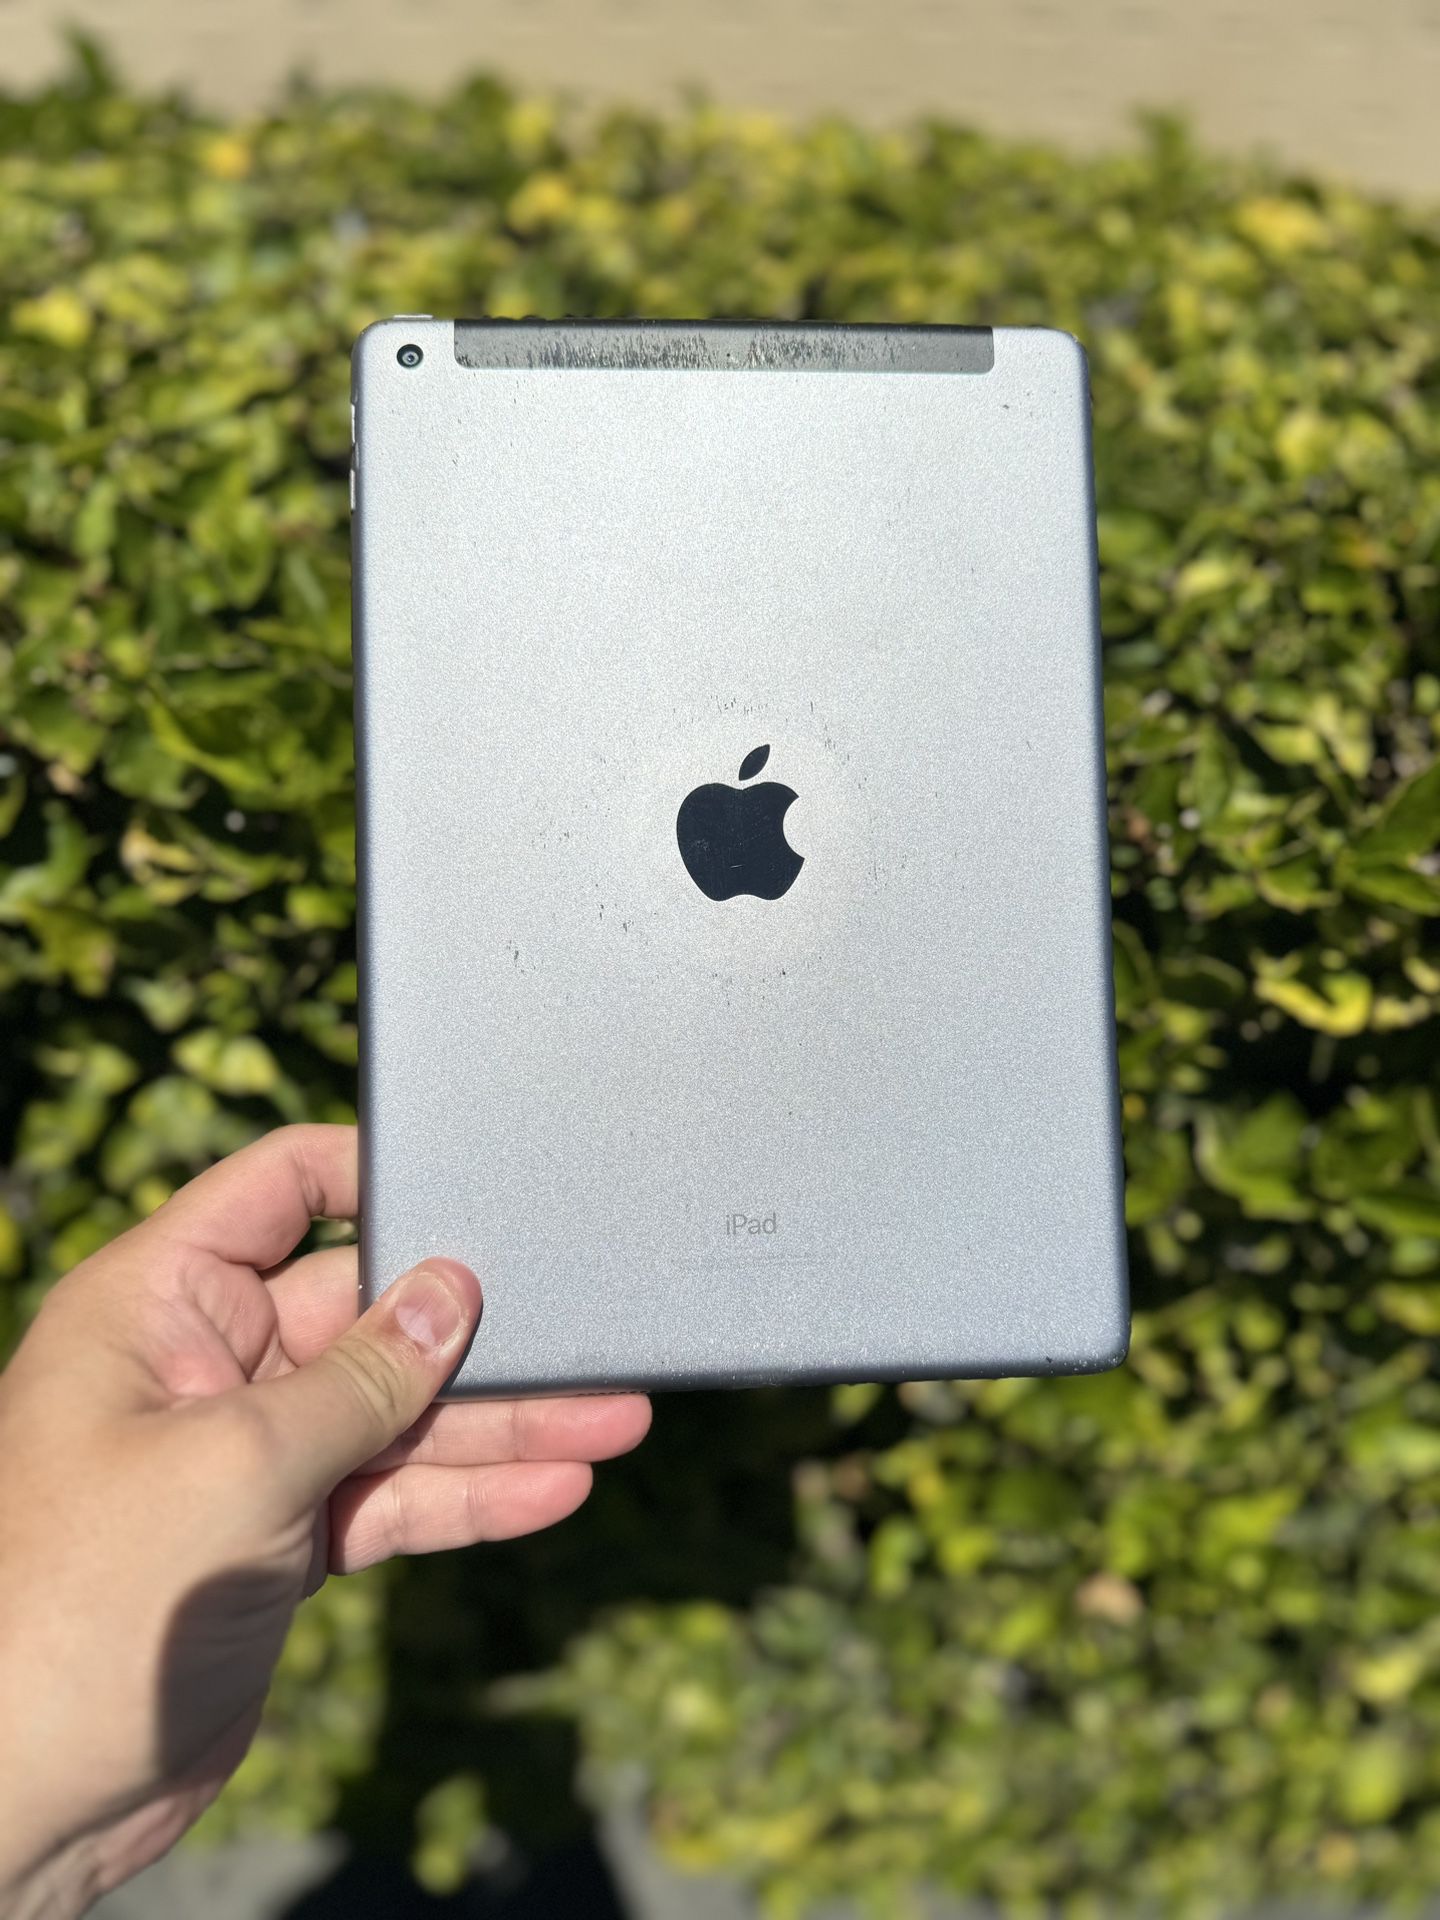 Apple IPAD 5th Gen 9.4 Inches 32GB Fair Condition WIfI-and LTE Data UNLOCKED use any carriers. Hablo espanol  